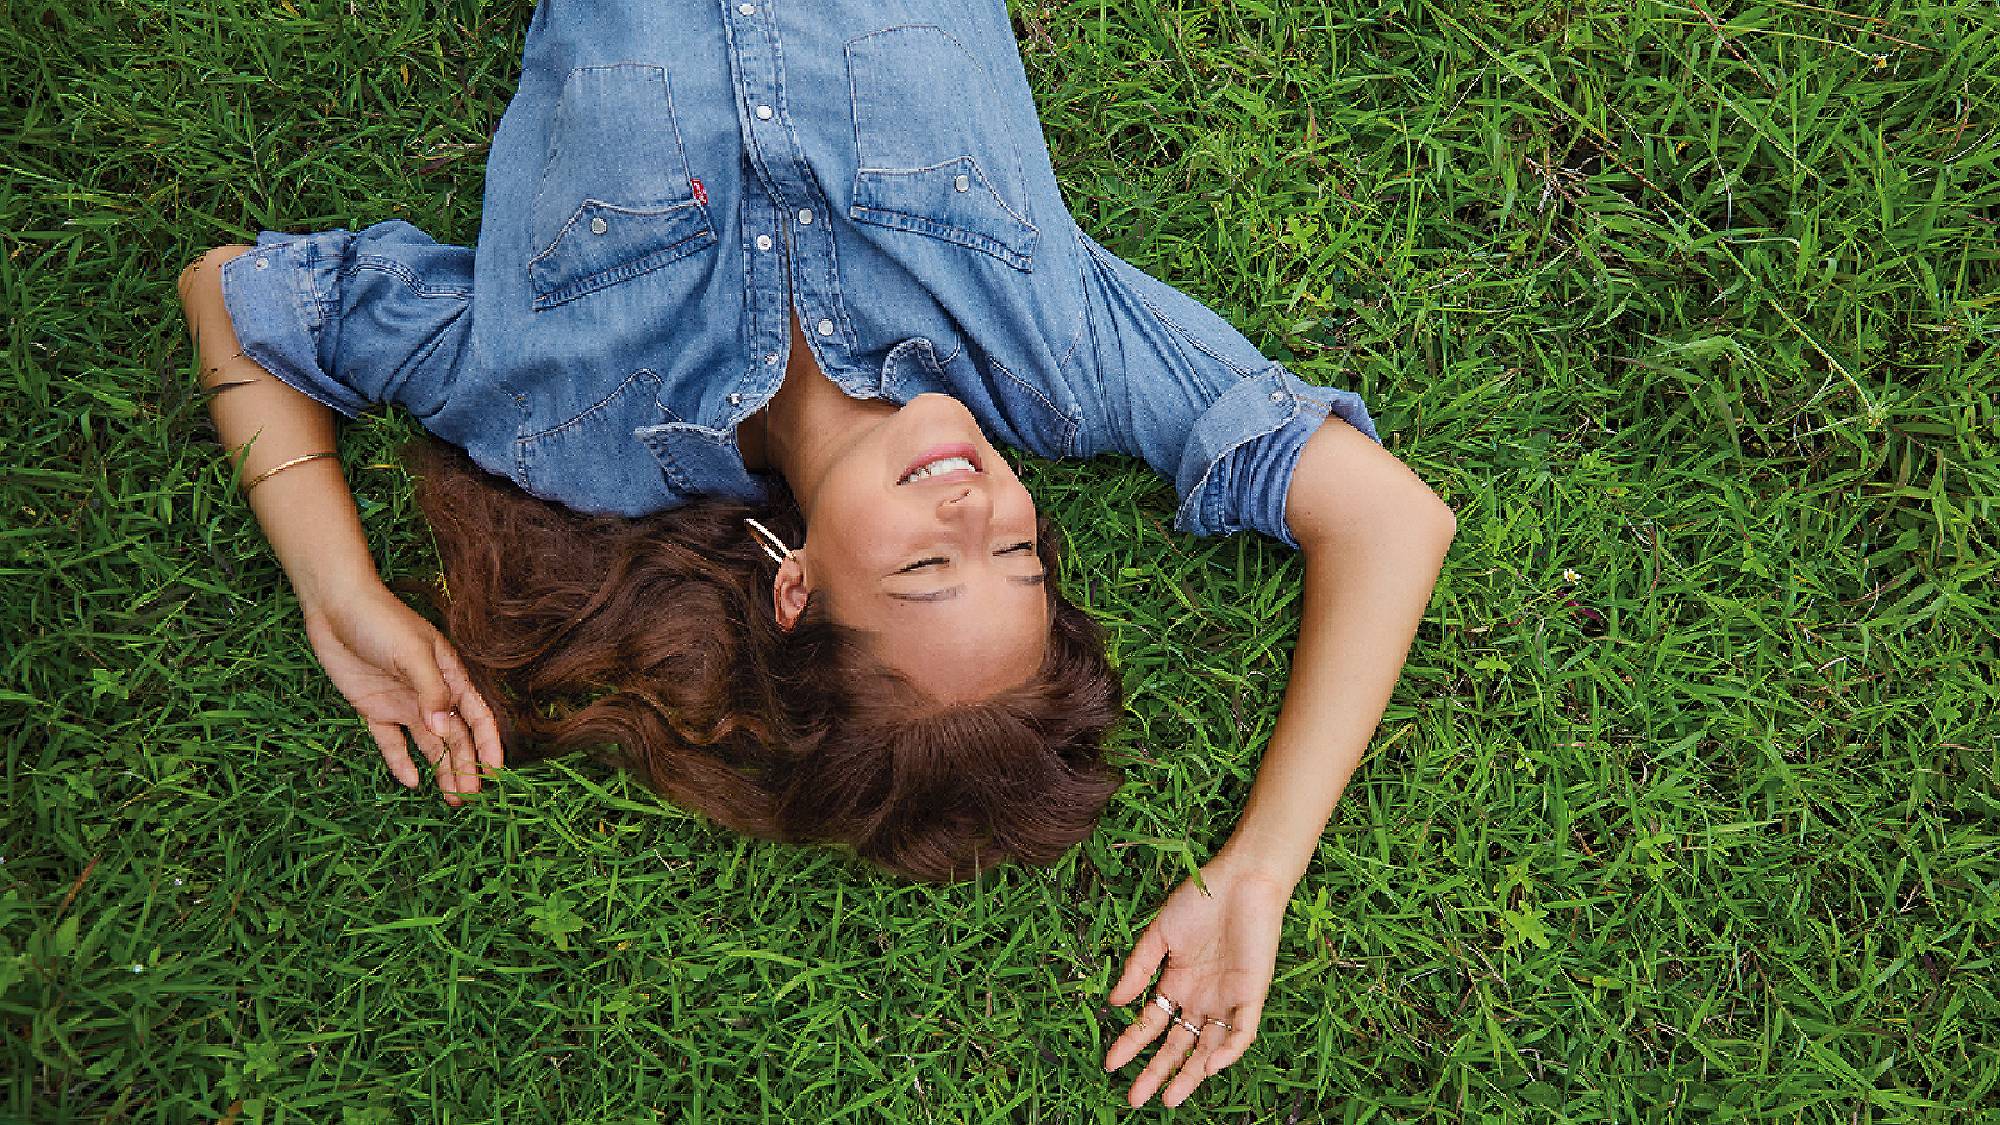 A photo of Melati wearing a Levi's button up lying on green grass smiling